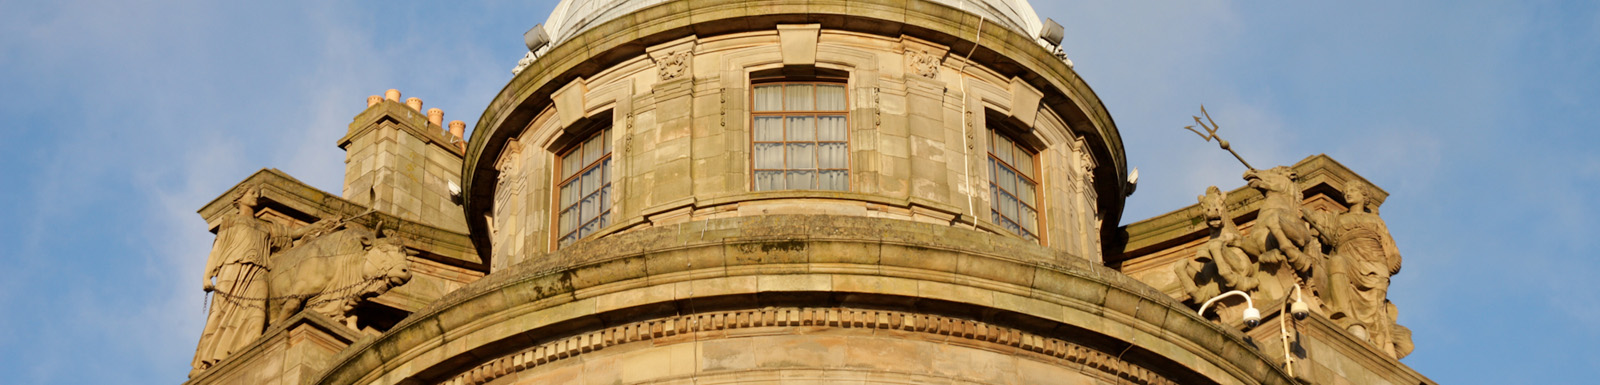 Detail of the Clyde Navigation Trust building on The Broomielaw